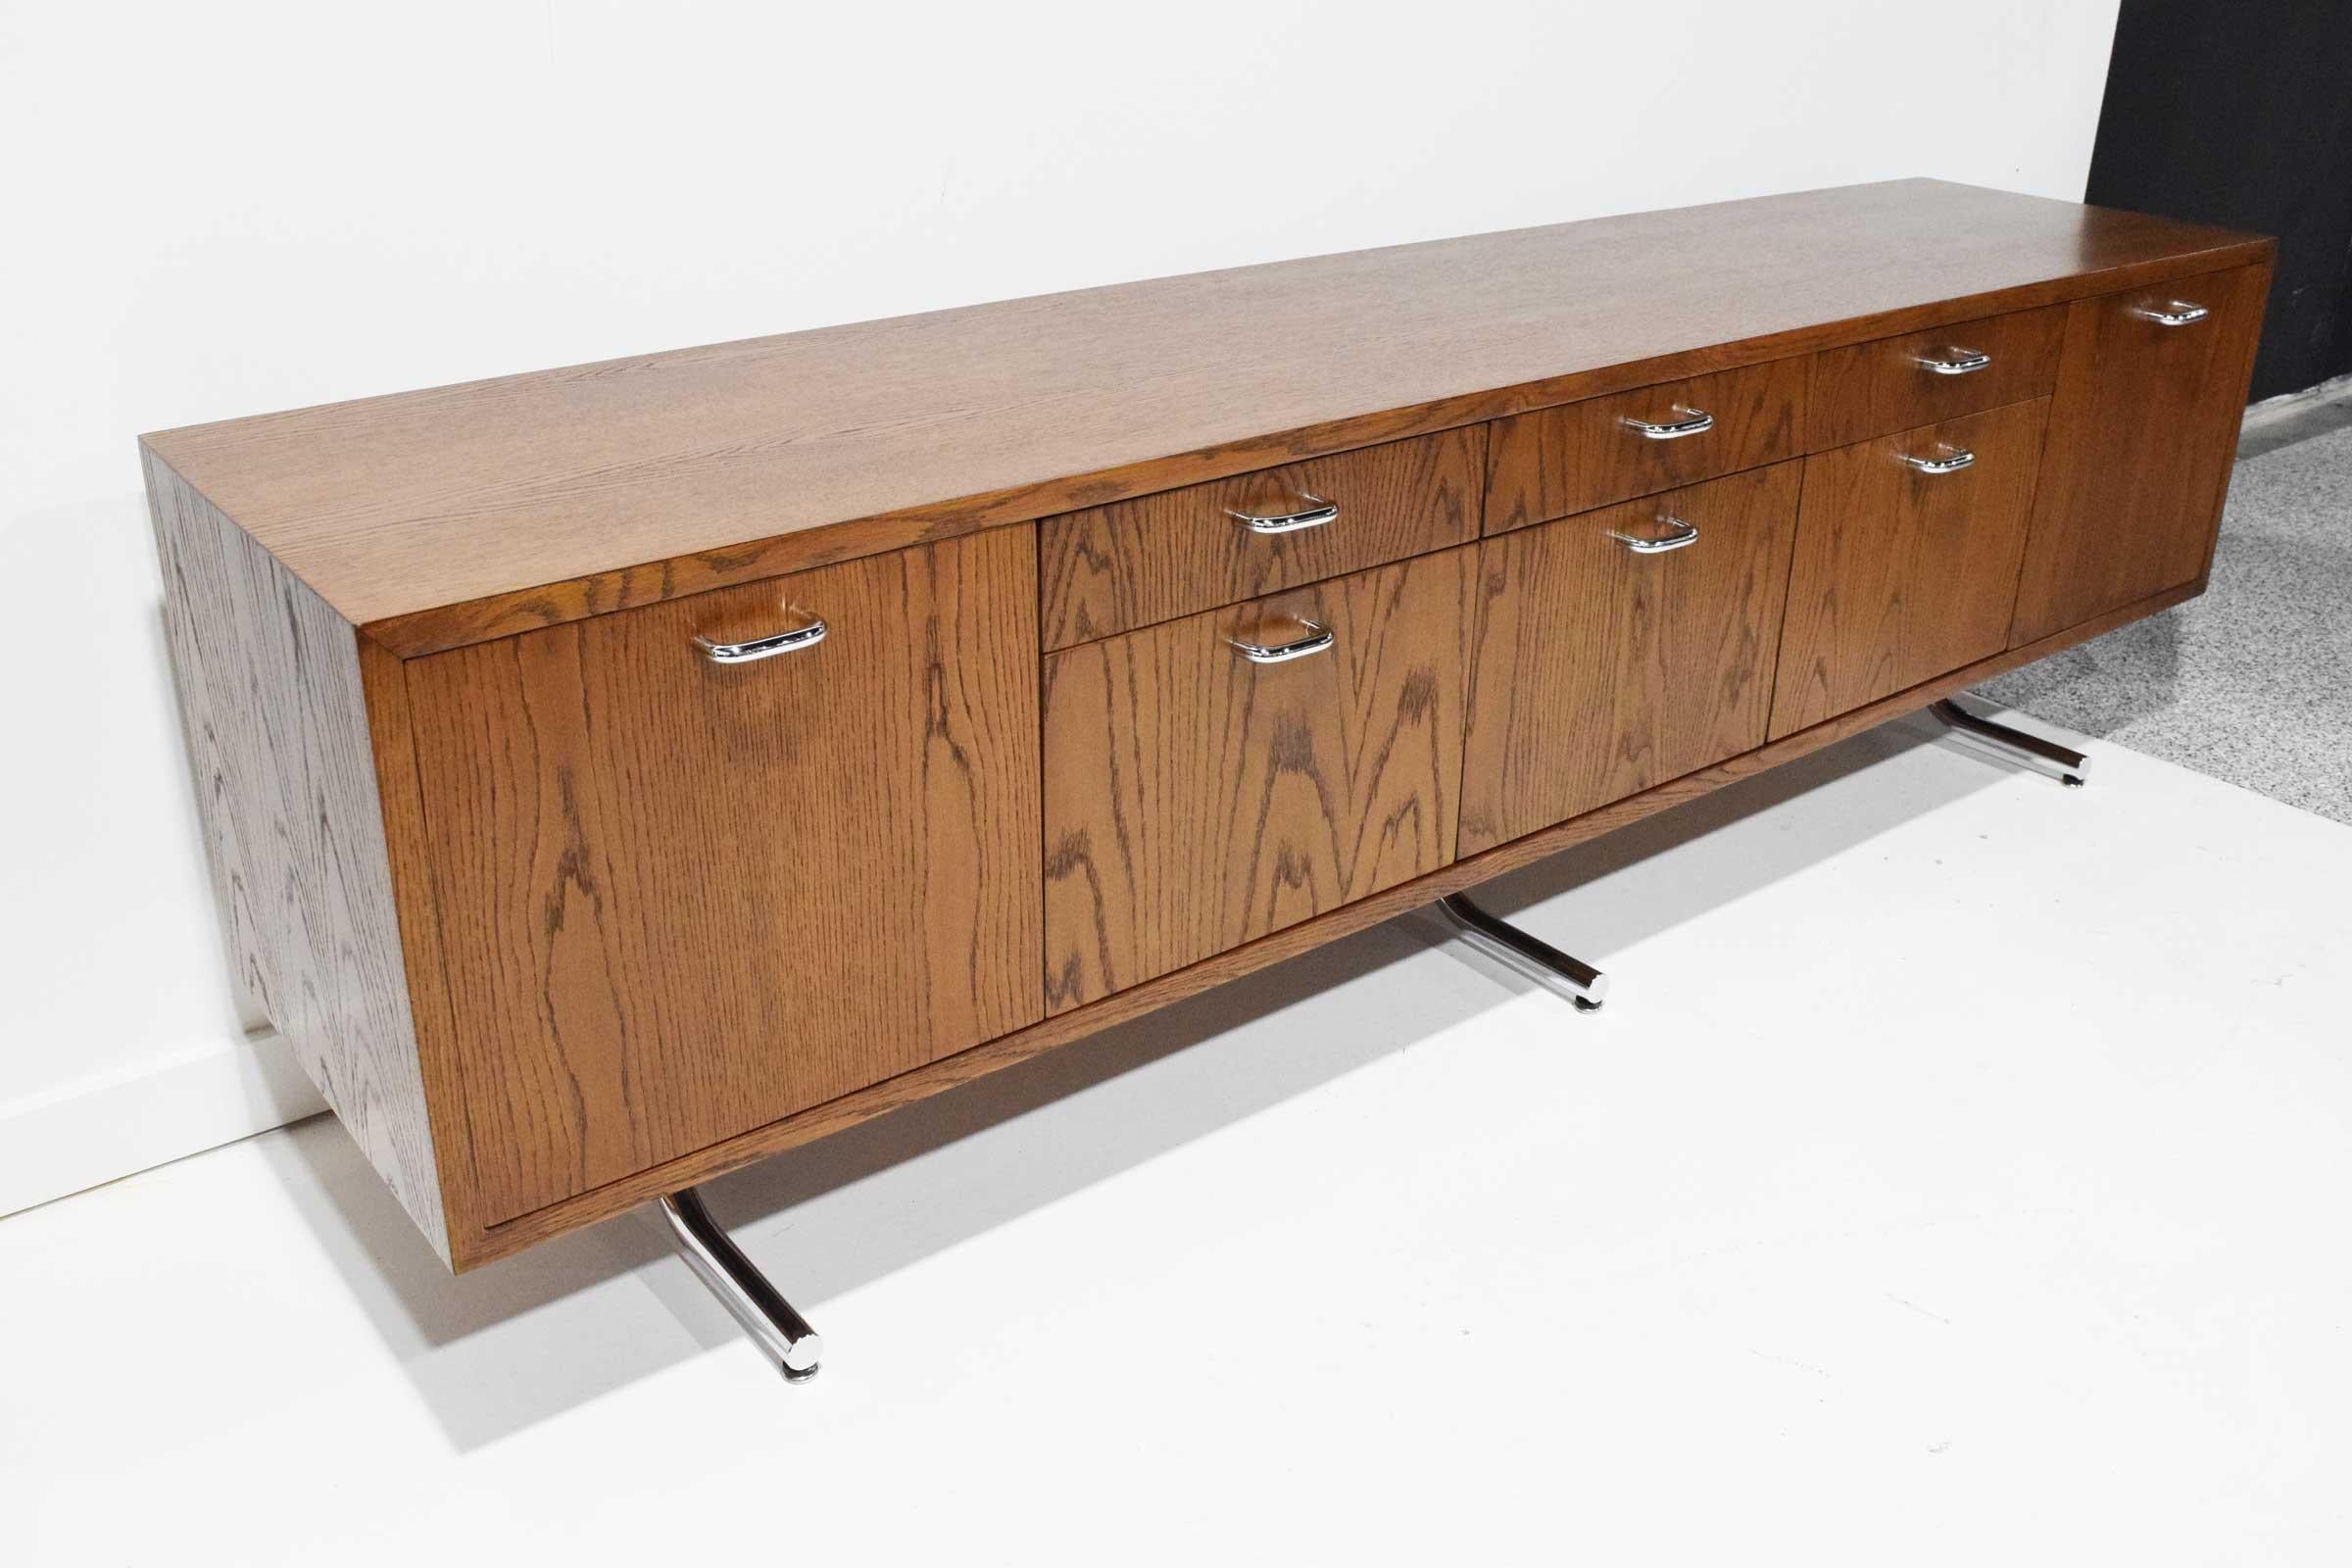 We are fairly sure this is by Hans Eichenberger. The credenza is extremely well made with beautifully grained oak and is finished in the back for floating in room if desired. Stylized curved steel chromed legs and steel chromed pulls. Plenty of